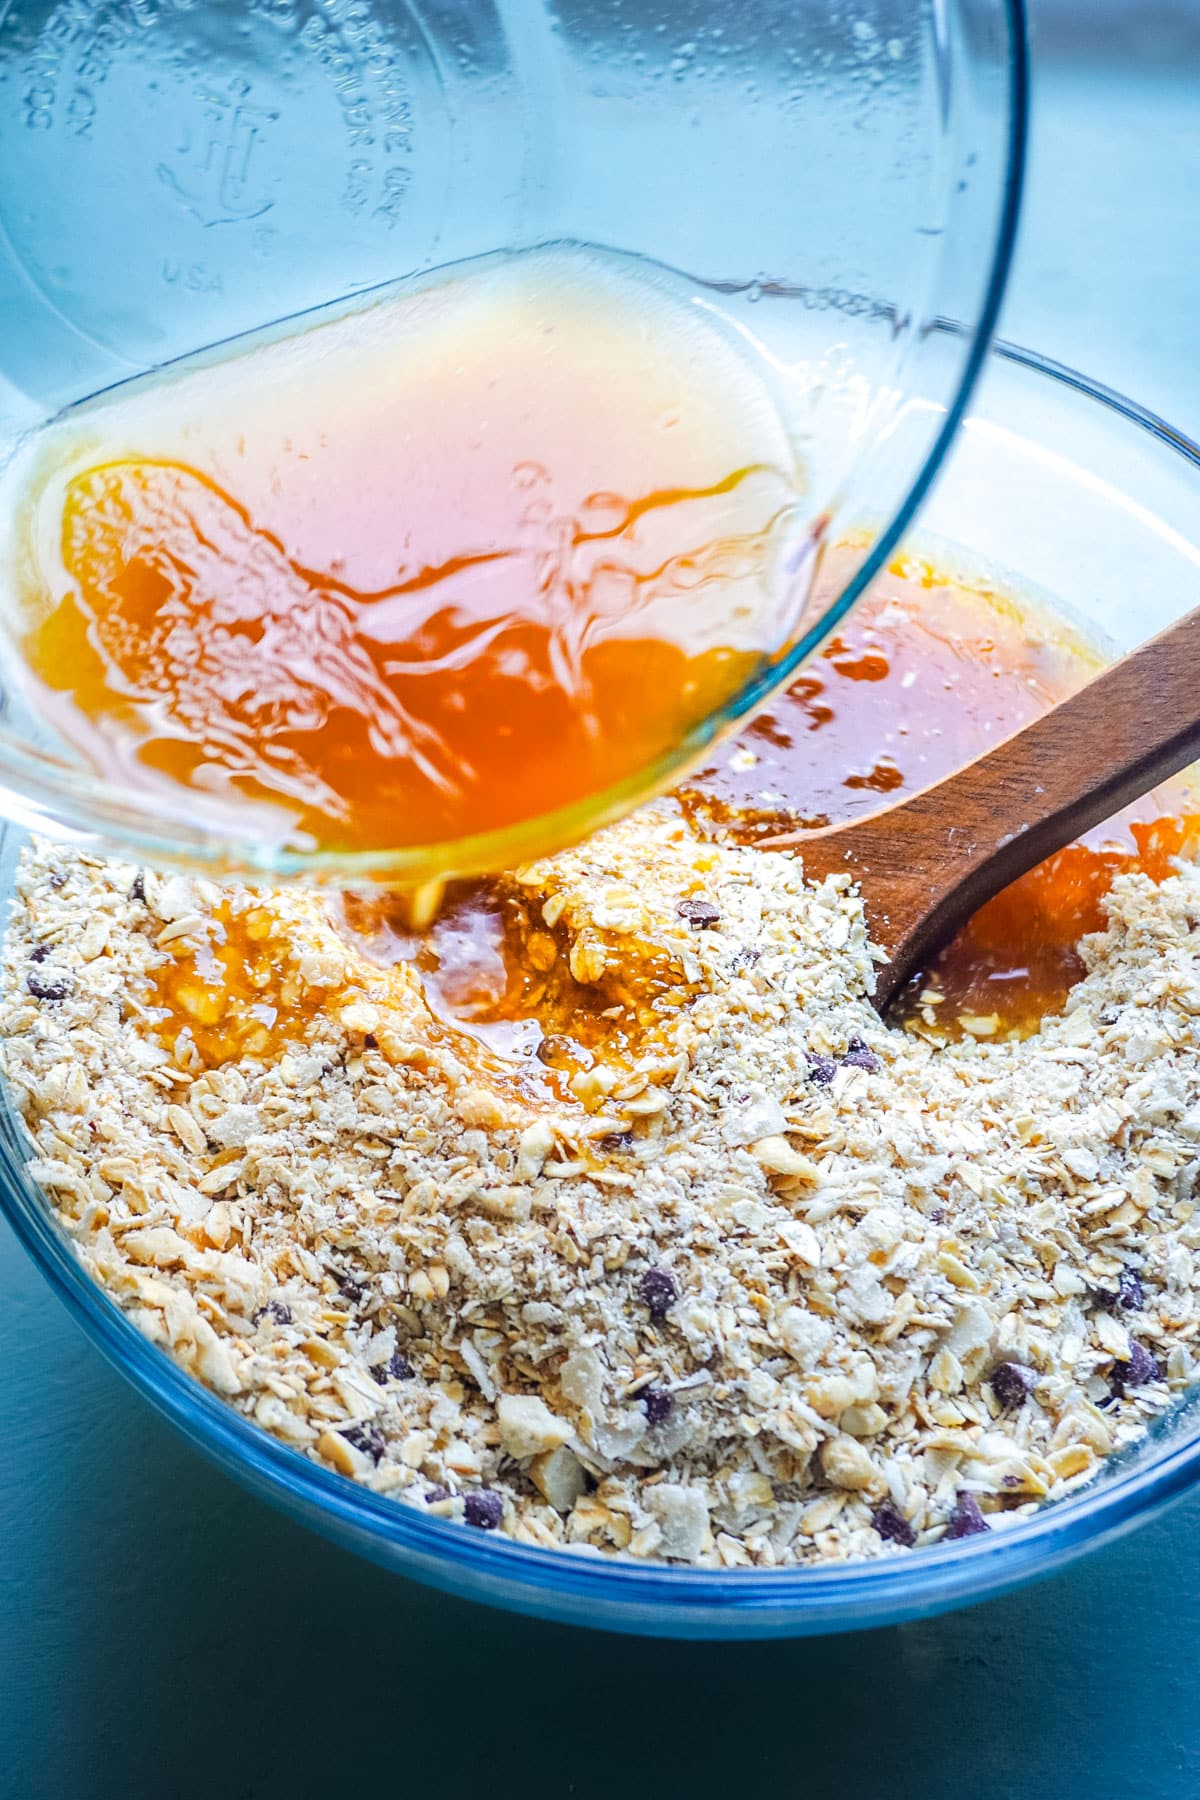 Honey poured into a bowl of oats and coconut.